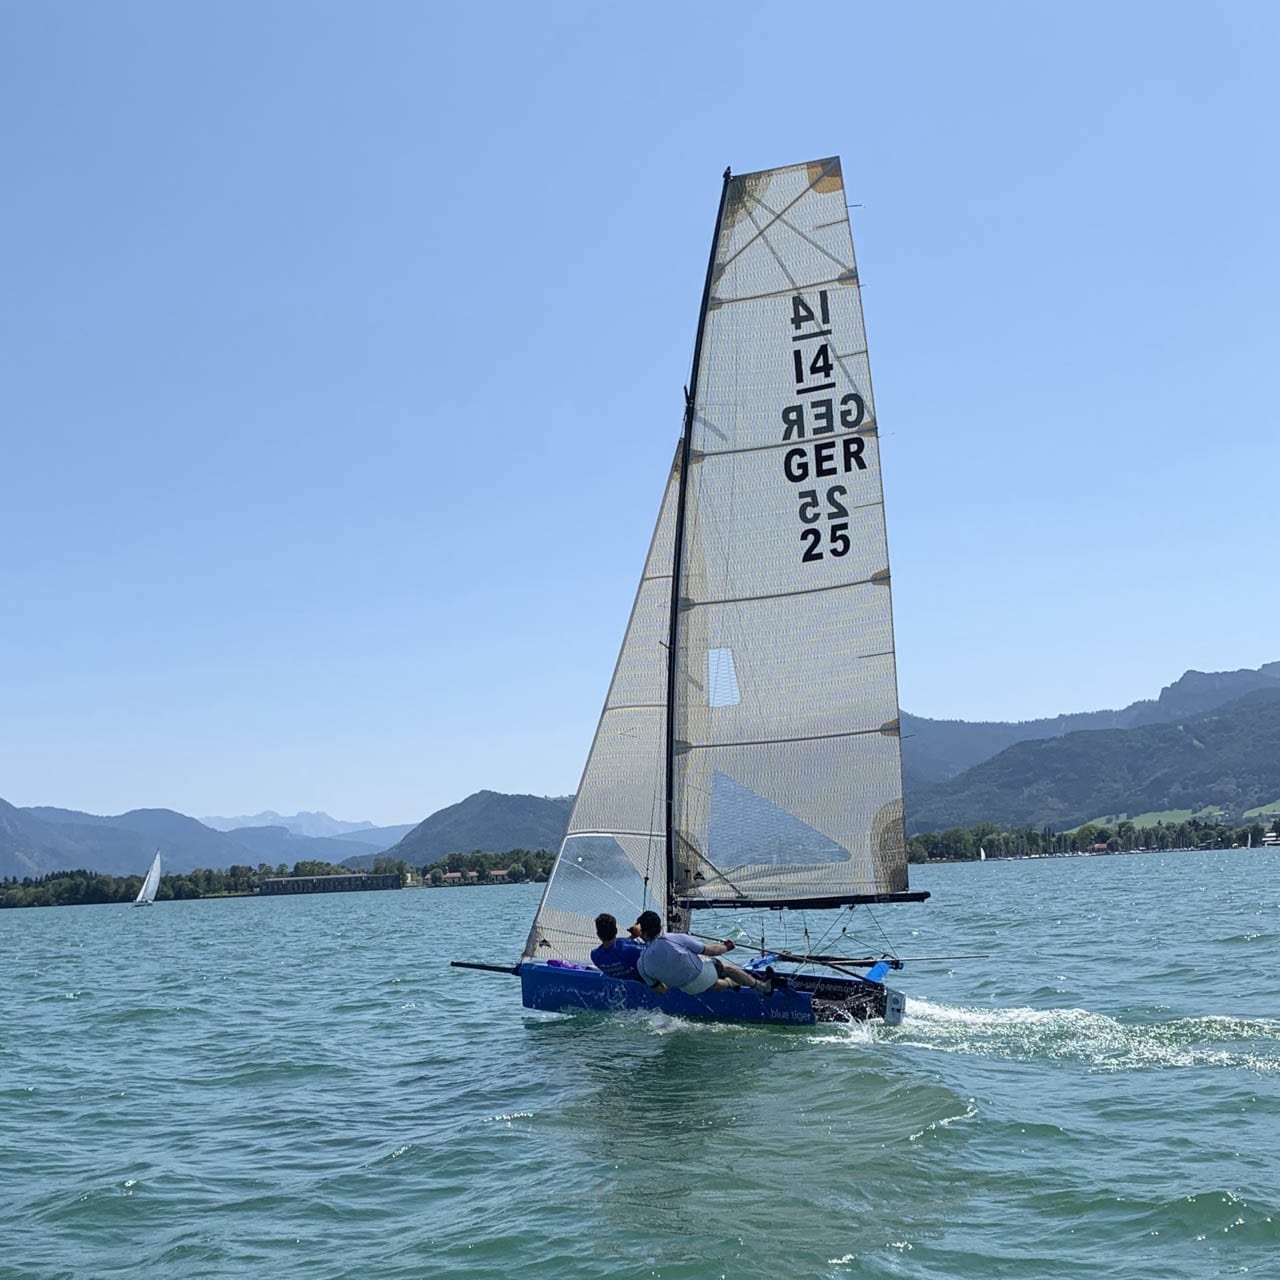  i14  German National Championship 2020  Chiemsee GER  Day 2